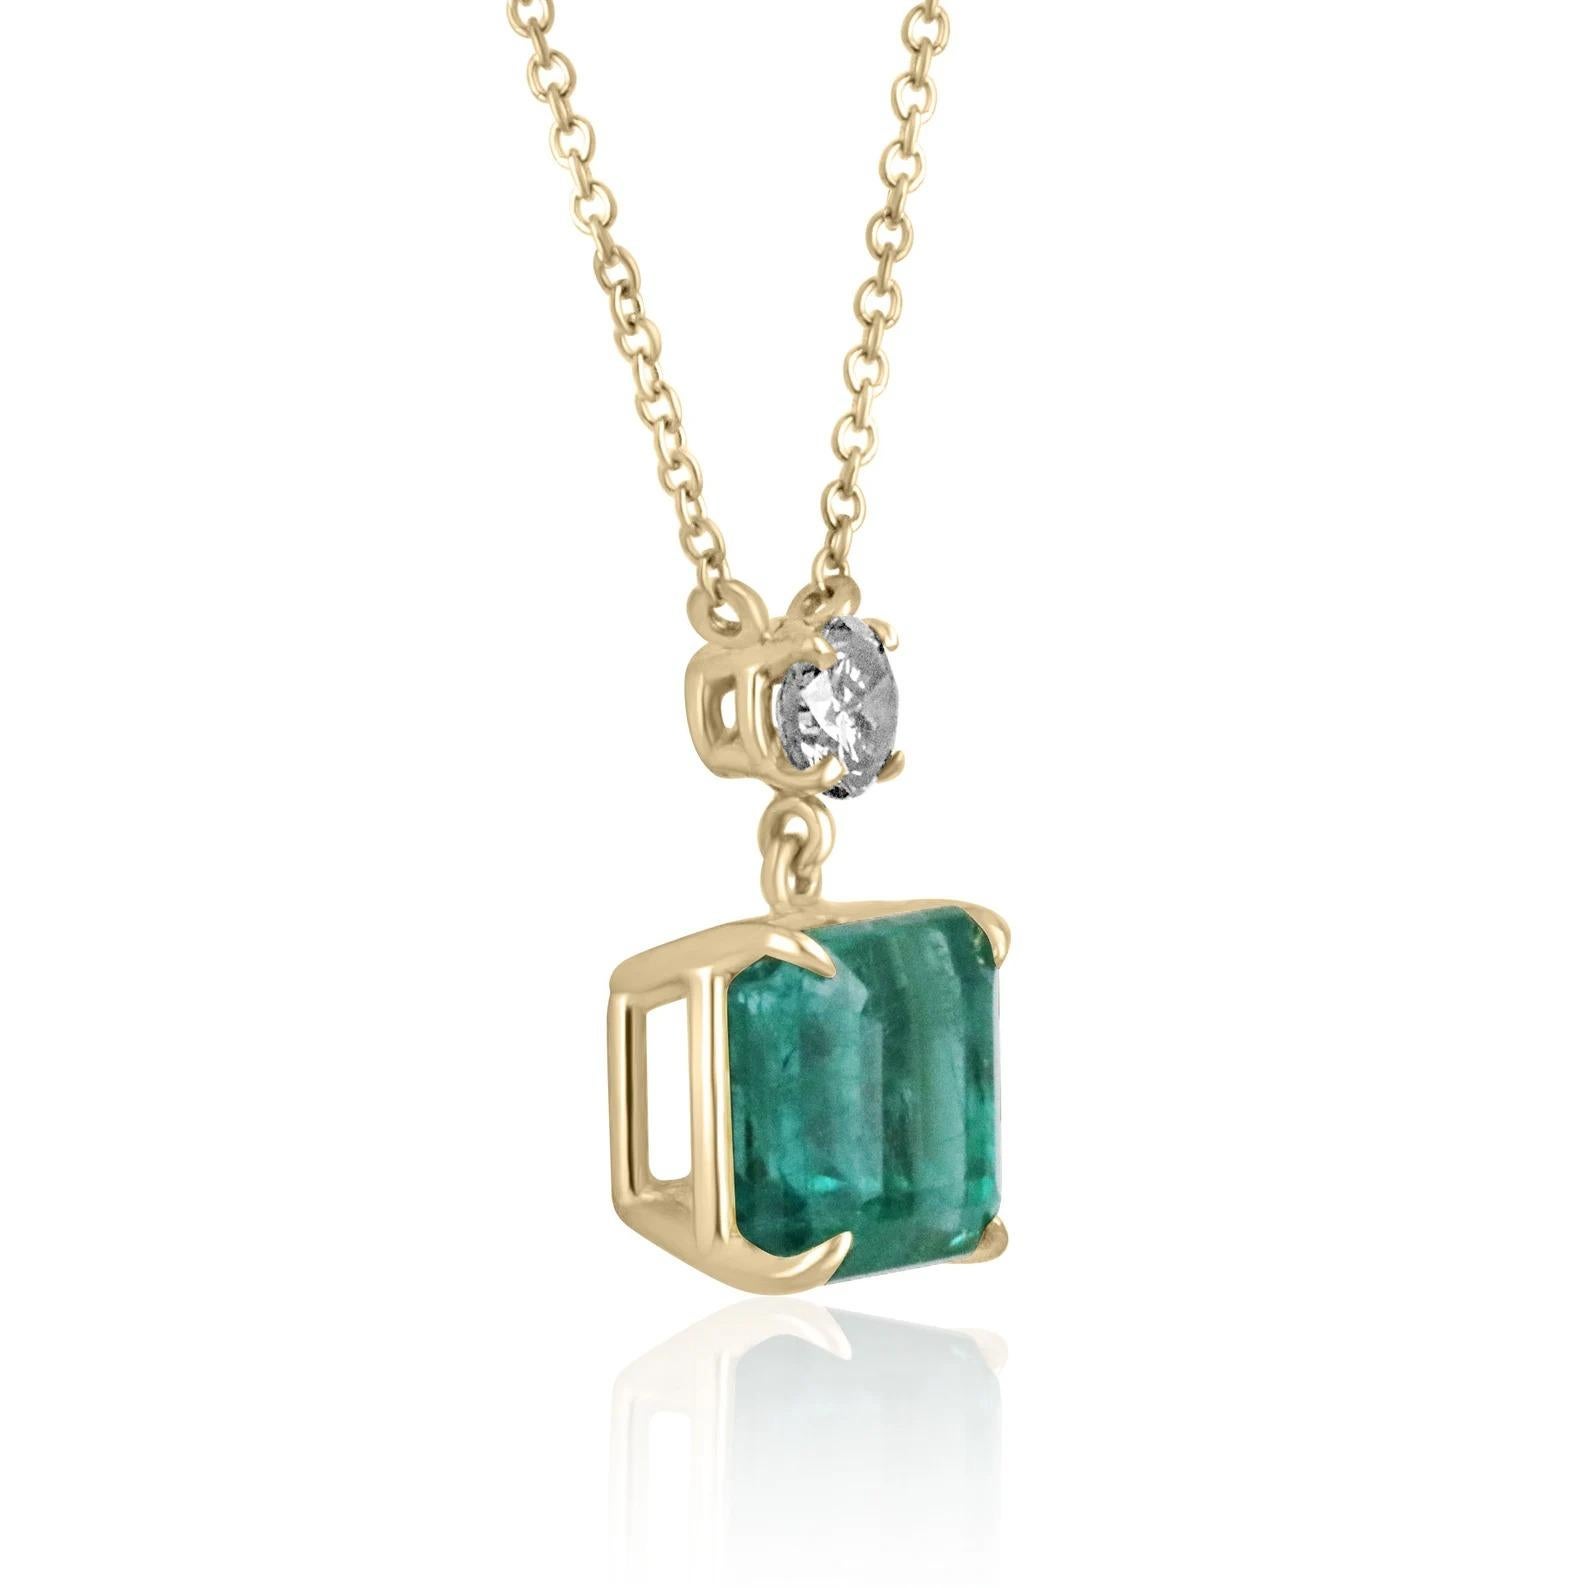 Featured here is a stunning, rich bluish-green emerald and round diamond necklace handmade in fine 14K yellow gold. Displayed is a lustrous, medium-rich green emerald with very good transparency, accented by a simple secure four-prong 14K mount,